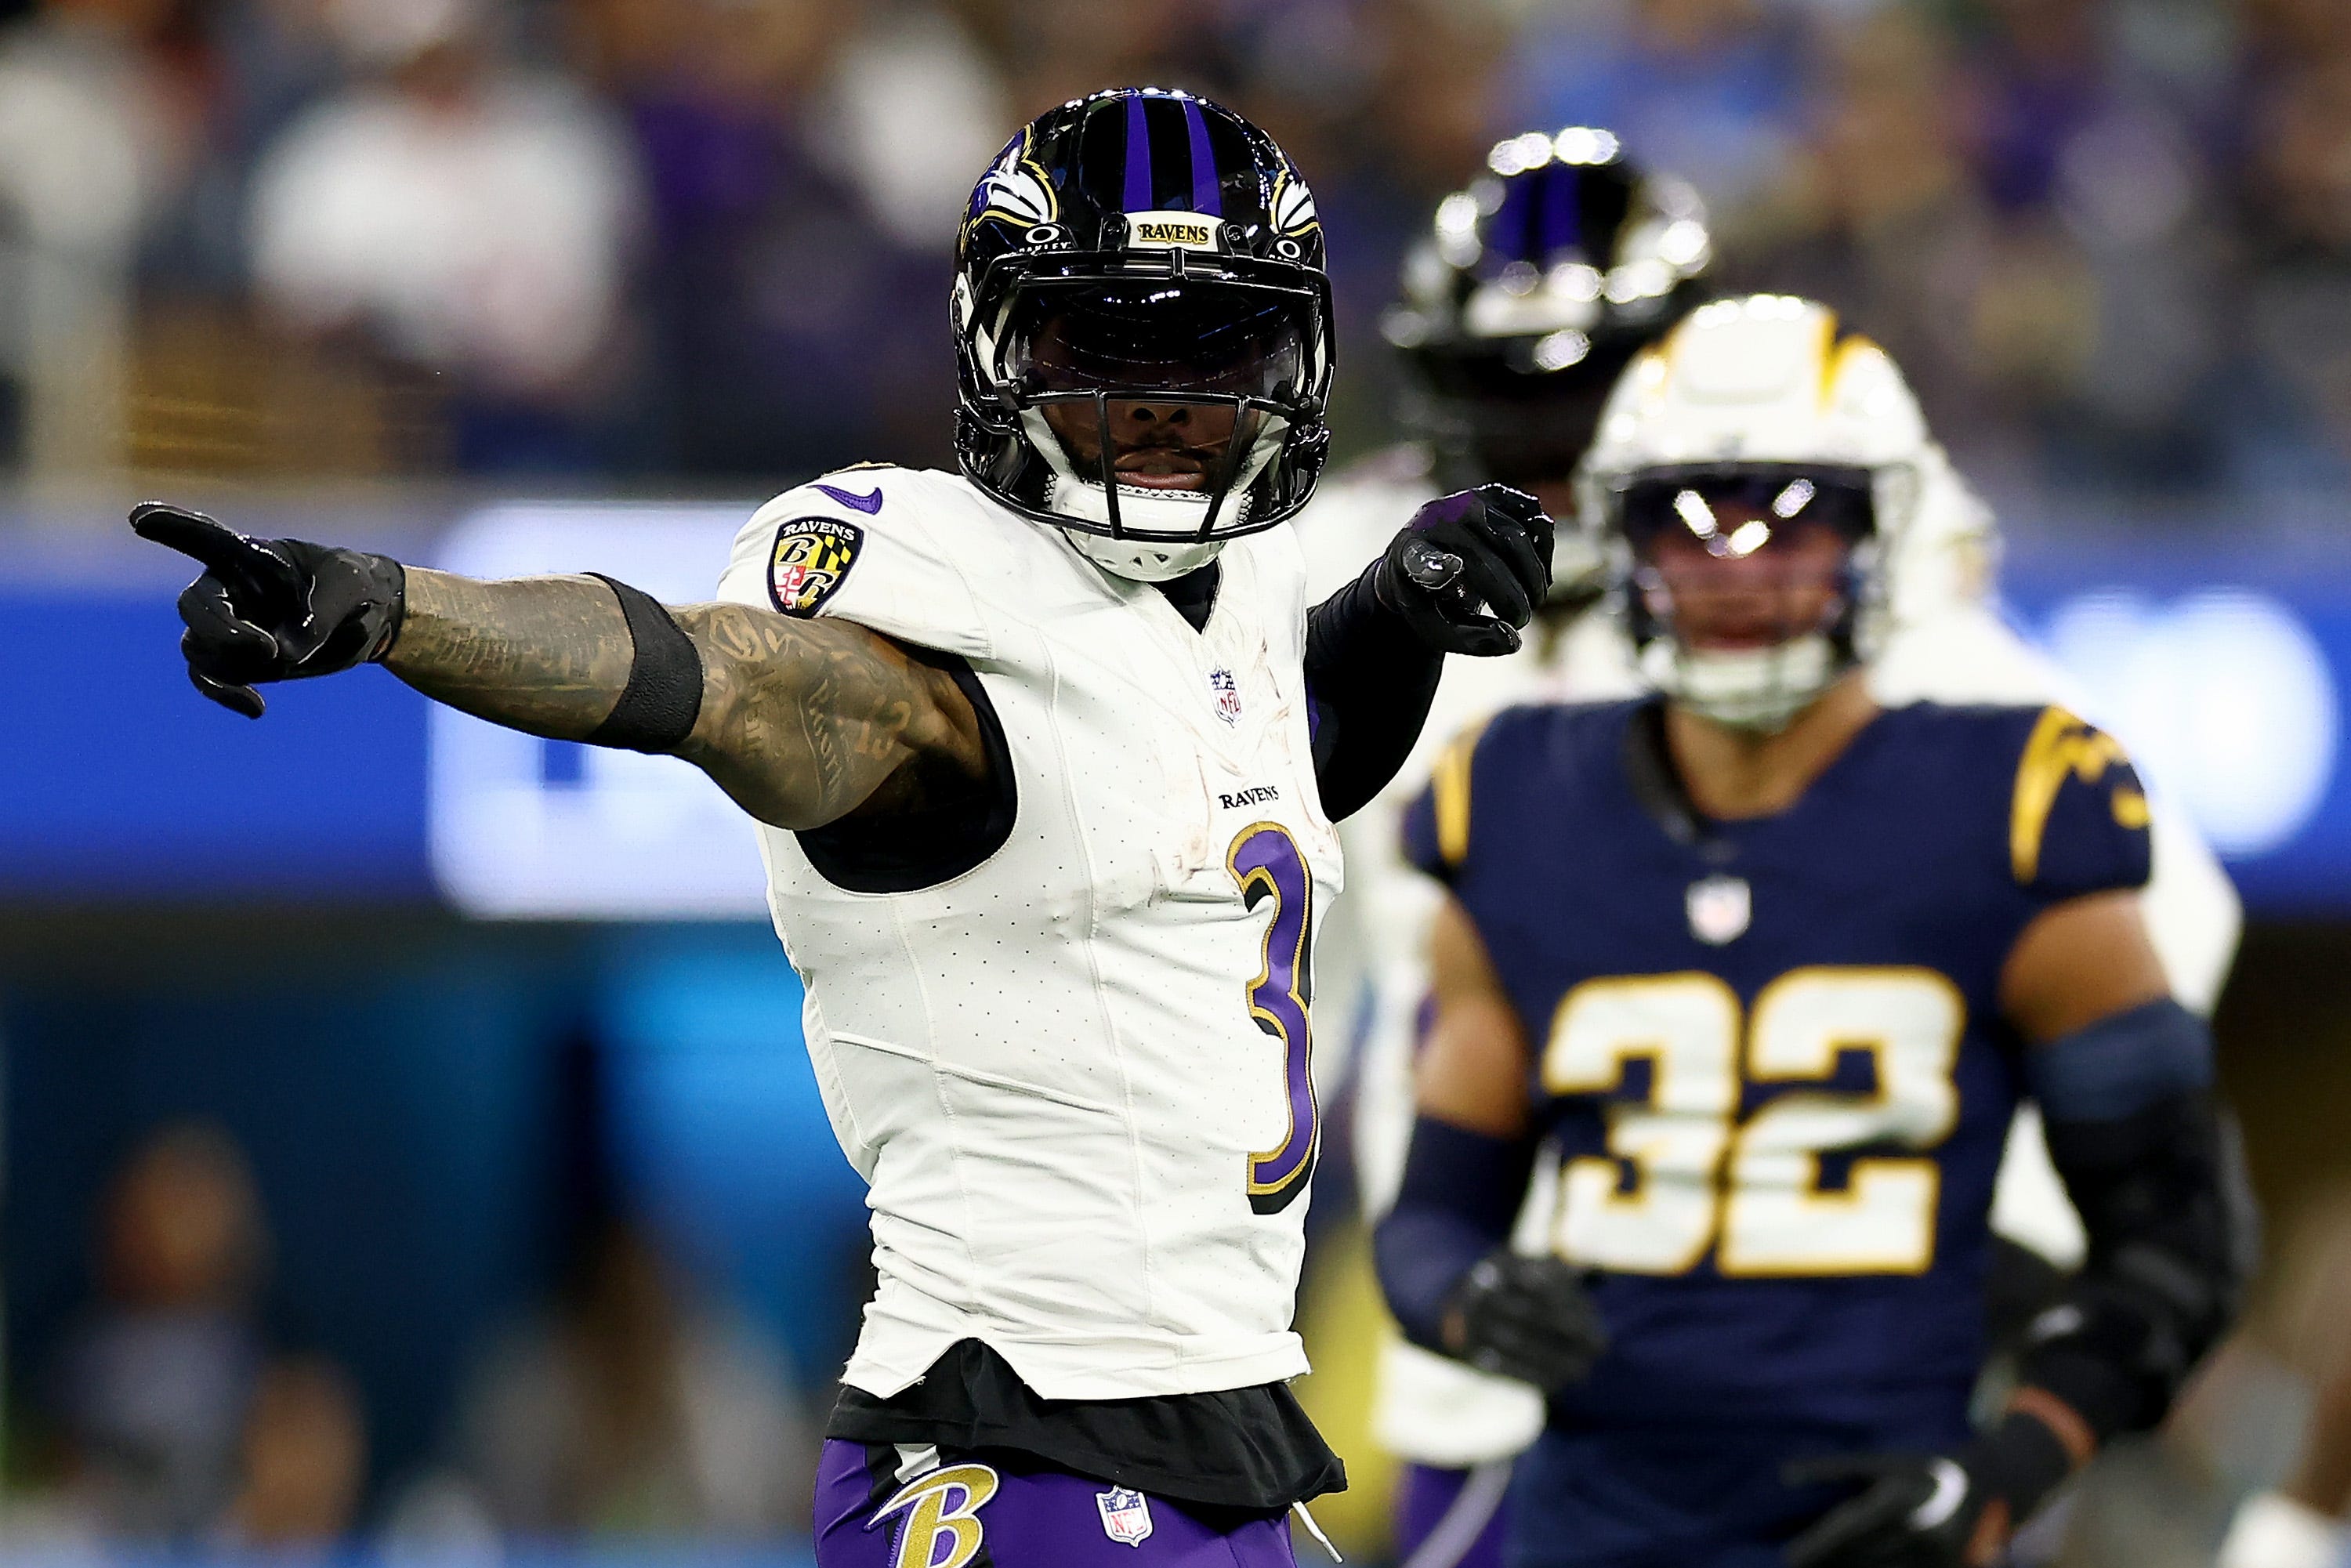 black friday, nfl playoff picture after week 12: ravens keep afc's top seed – but maybe not for long